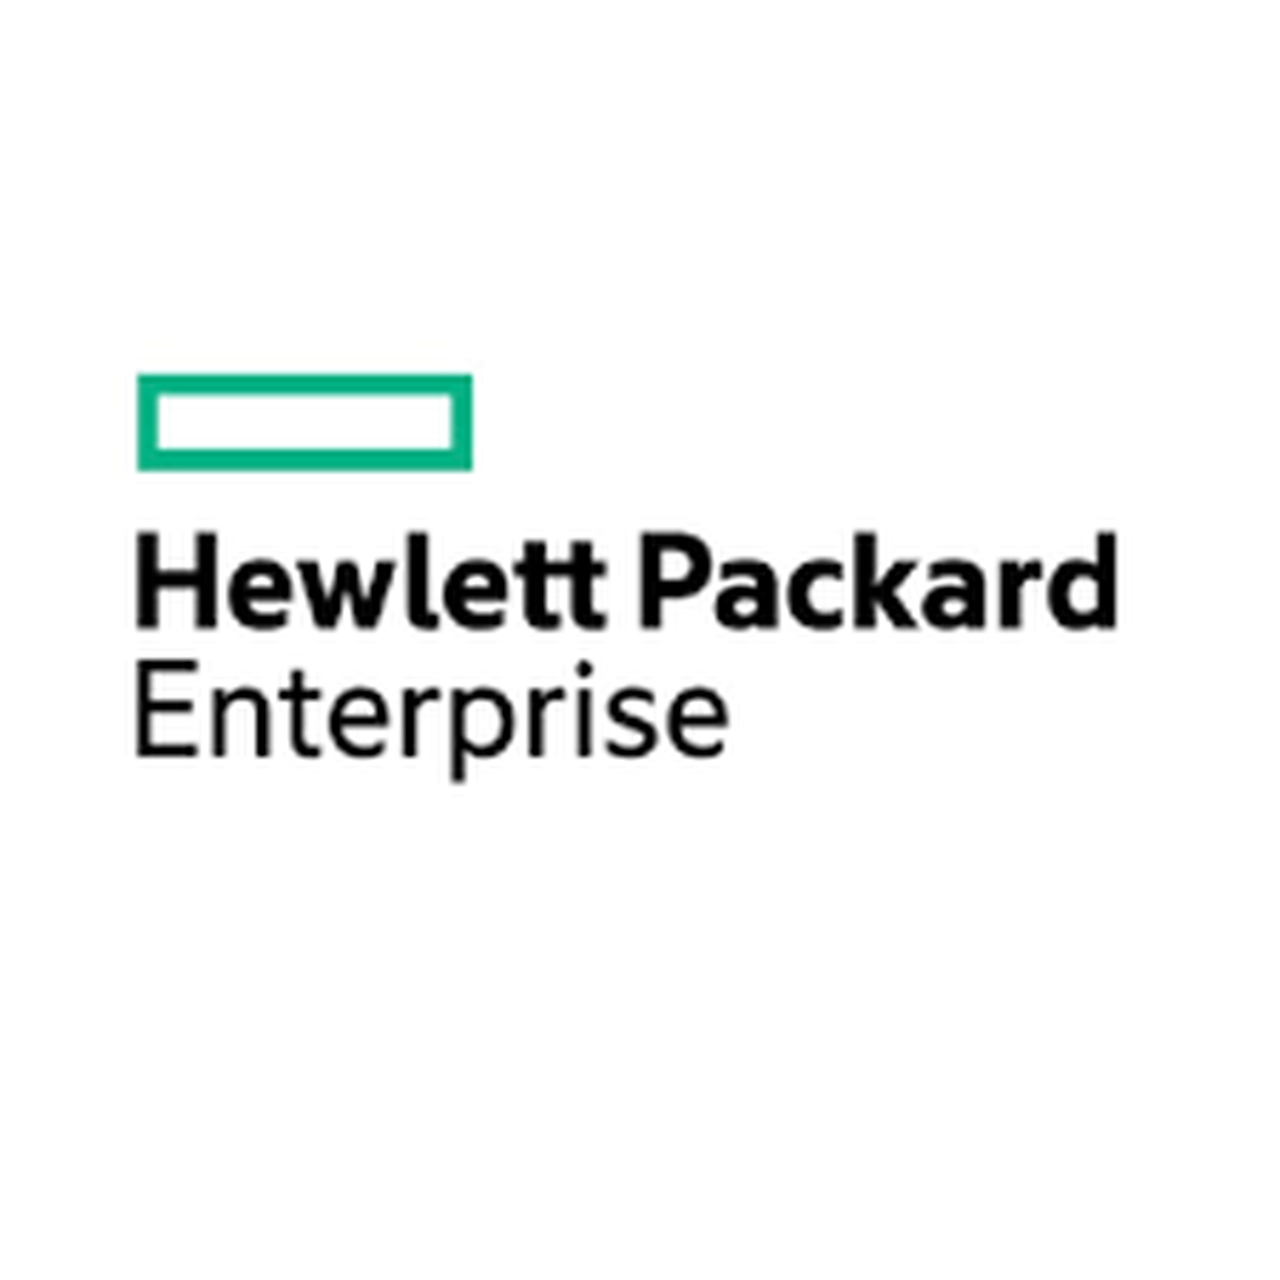 HPE Apollo d6500 Server Node Blank Kit Factory integrated